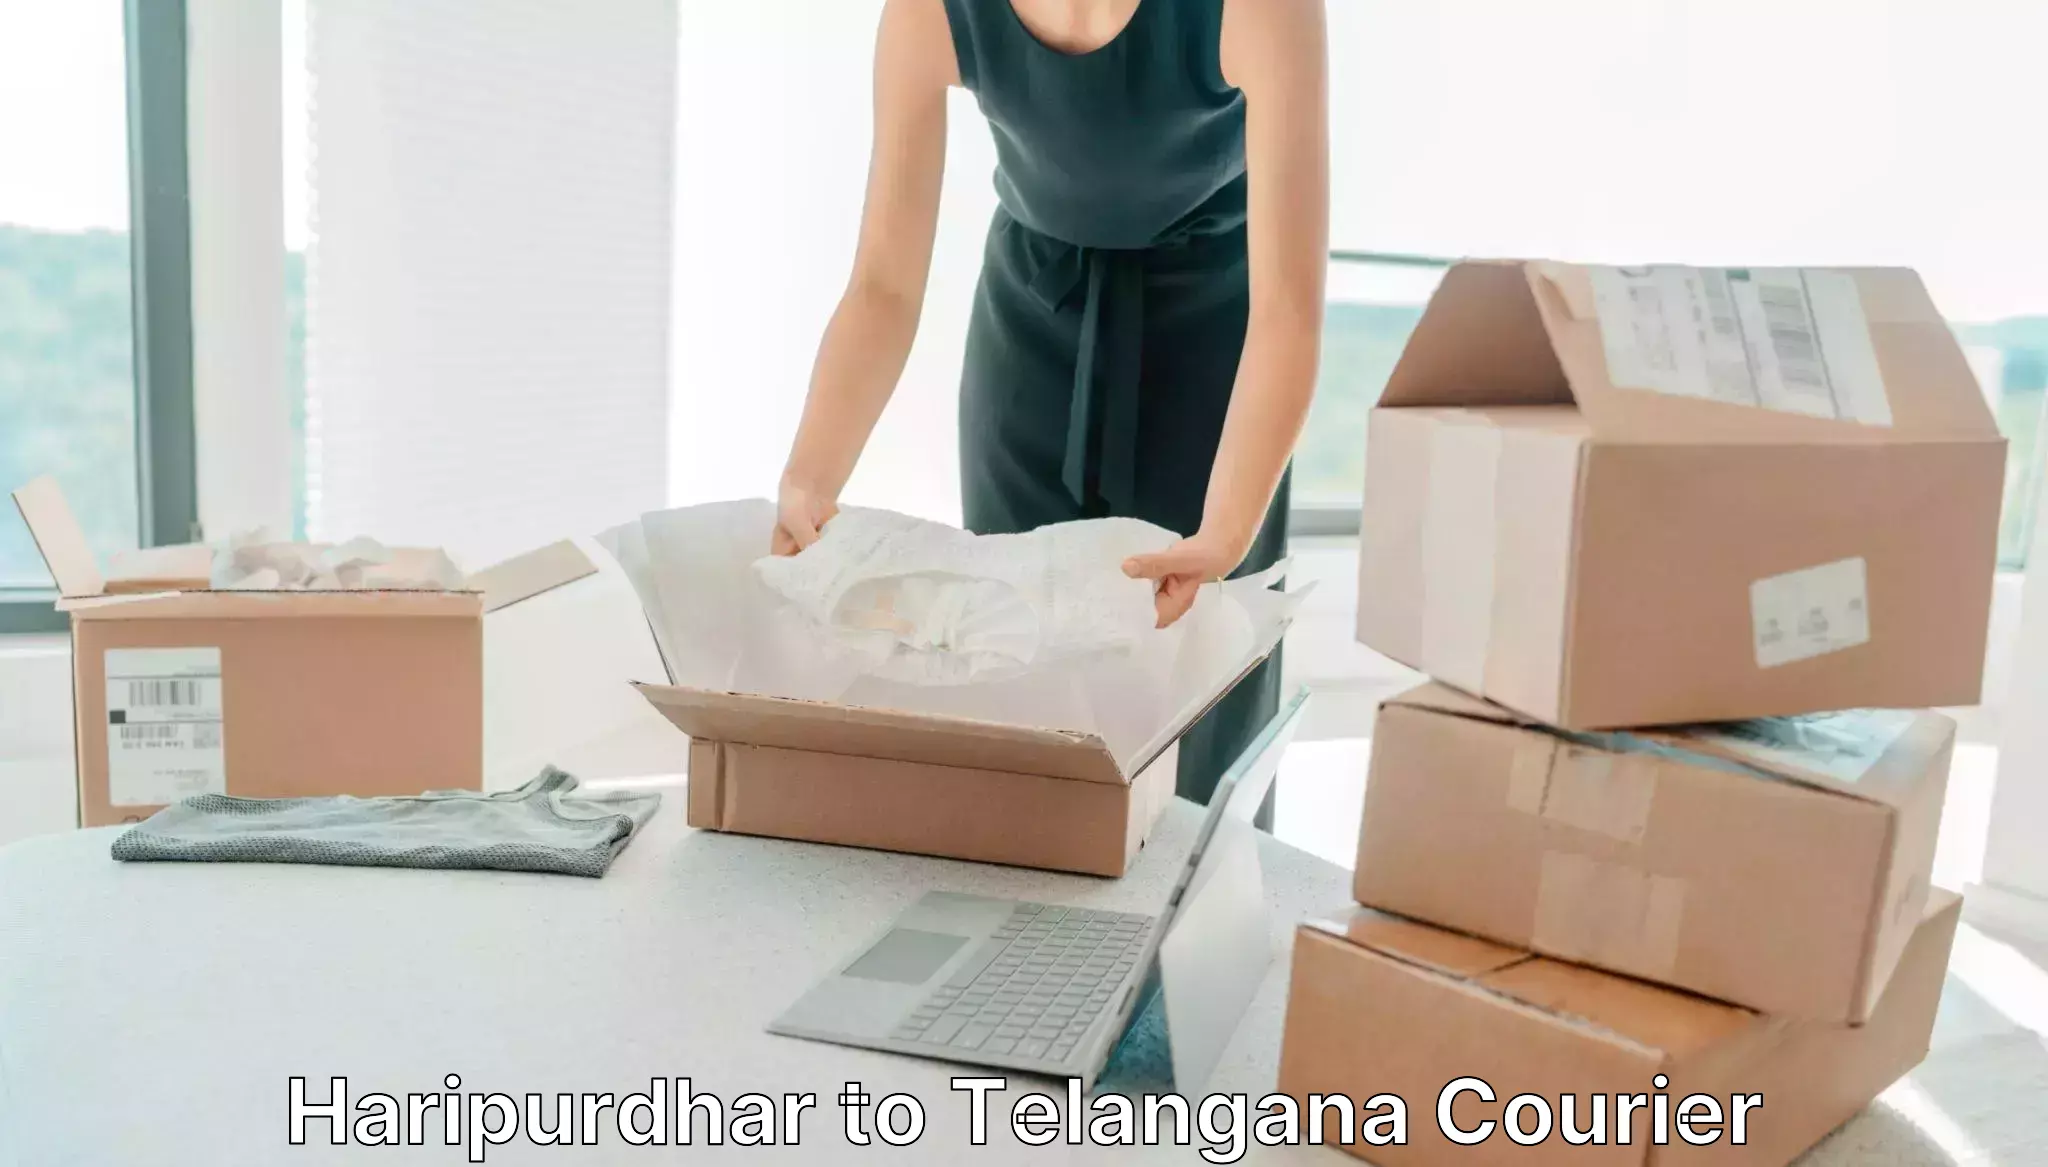 Professional courier services Haripurdhar to Chennur